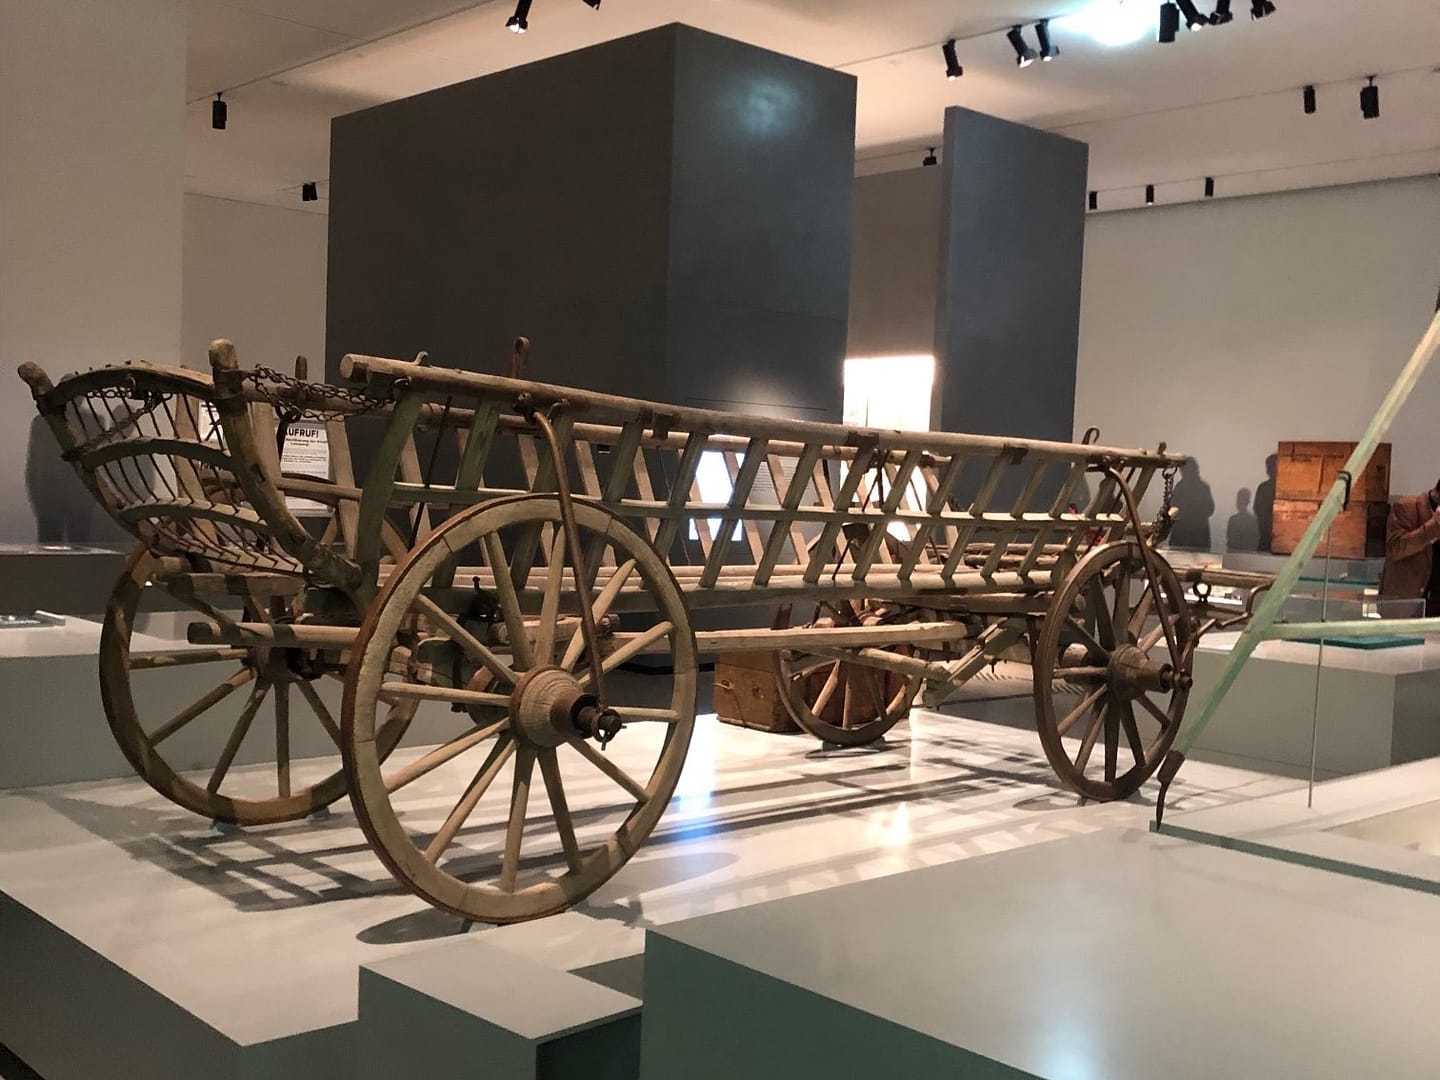 This is one of the actual wagons used to pull refugees across the Baltic Sea.